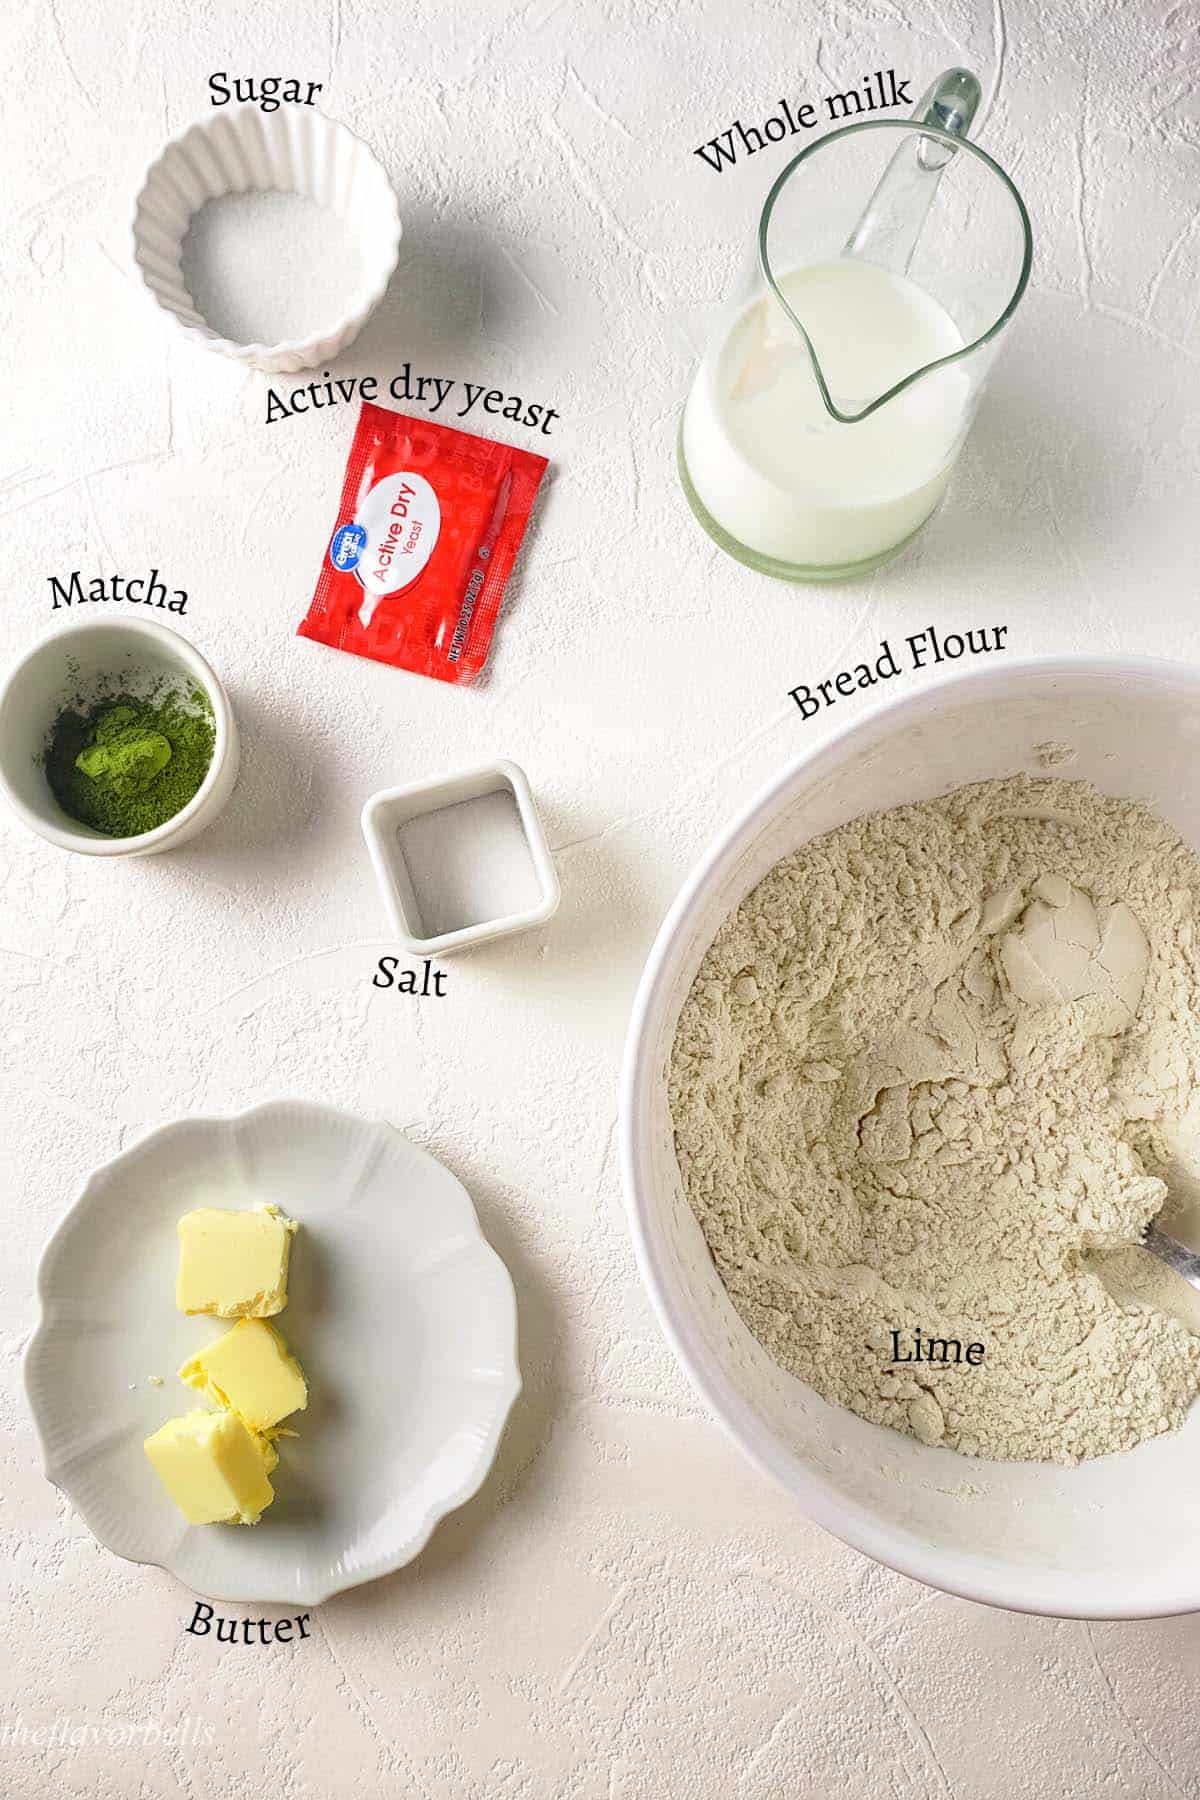 image showing all the ingredients required to make this bread recipe